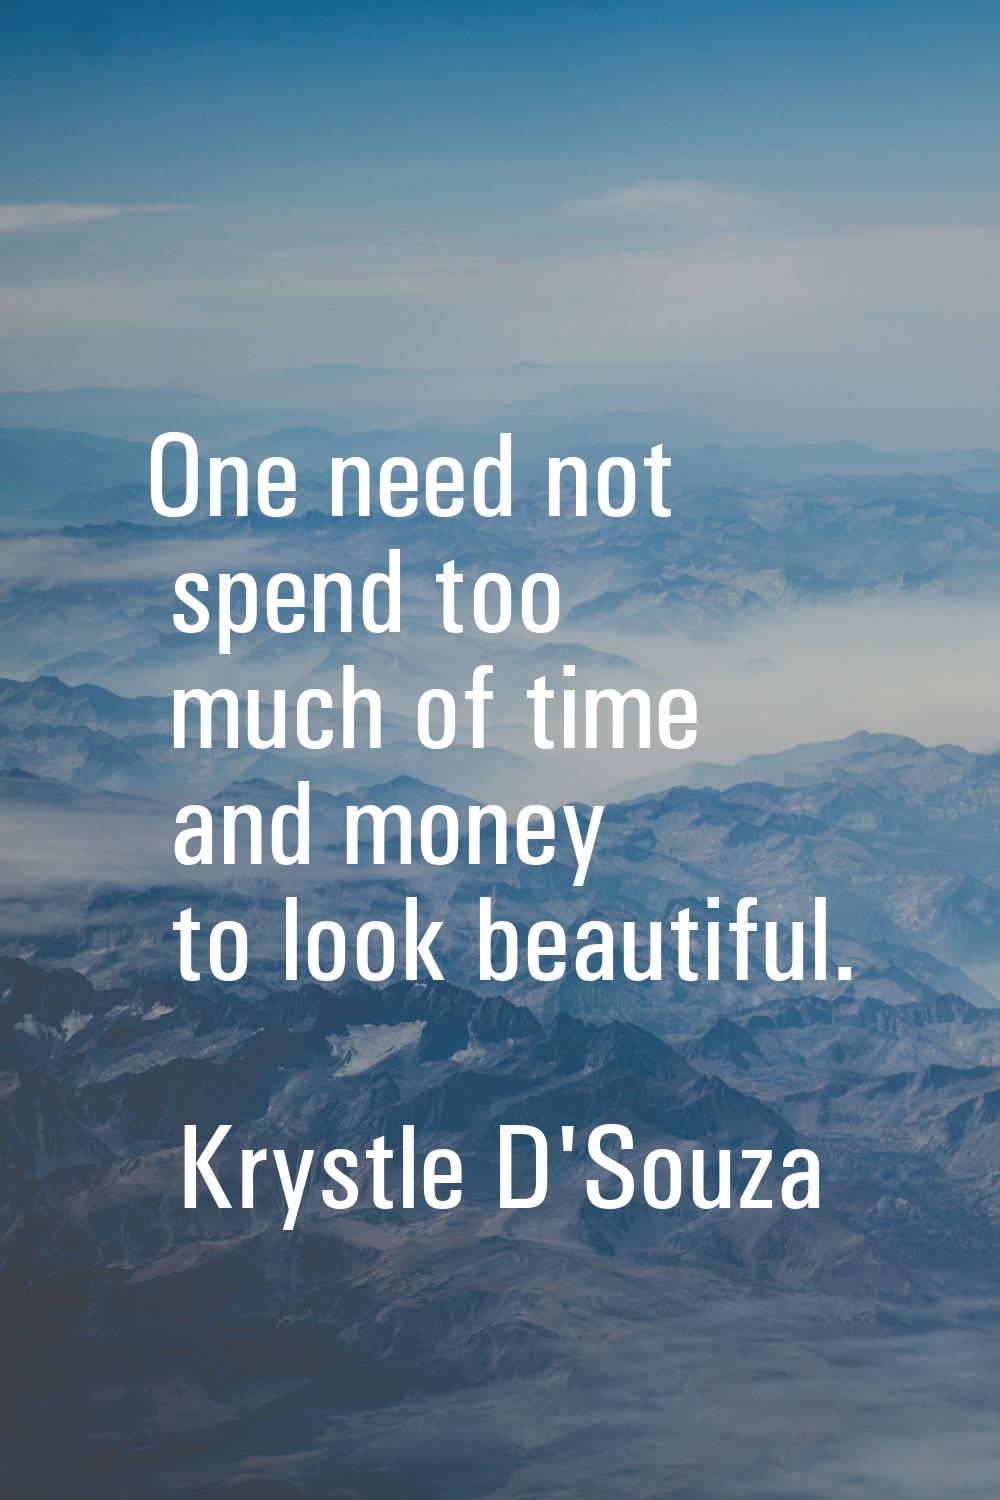 One need not spend too much of time and money to look beautiful.